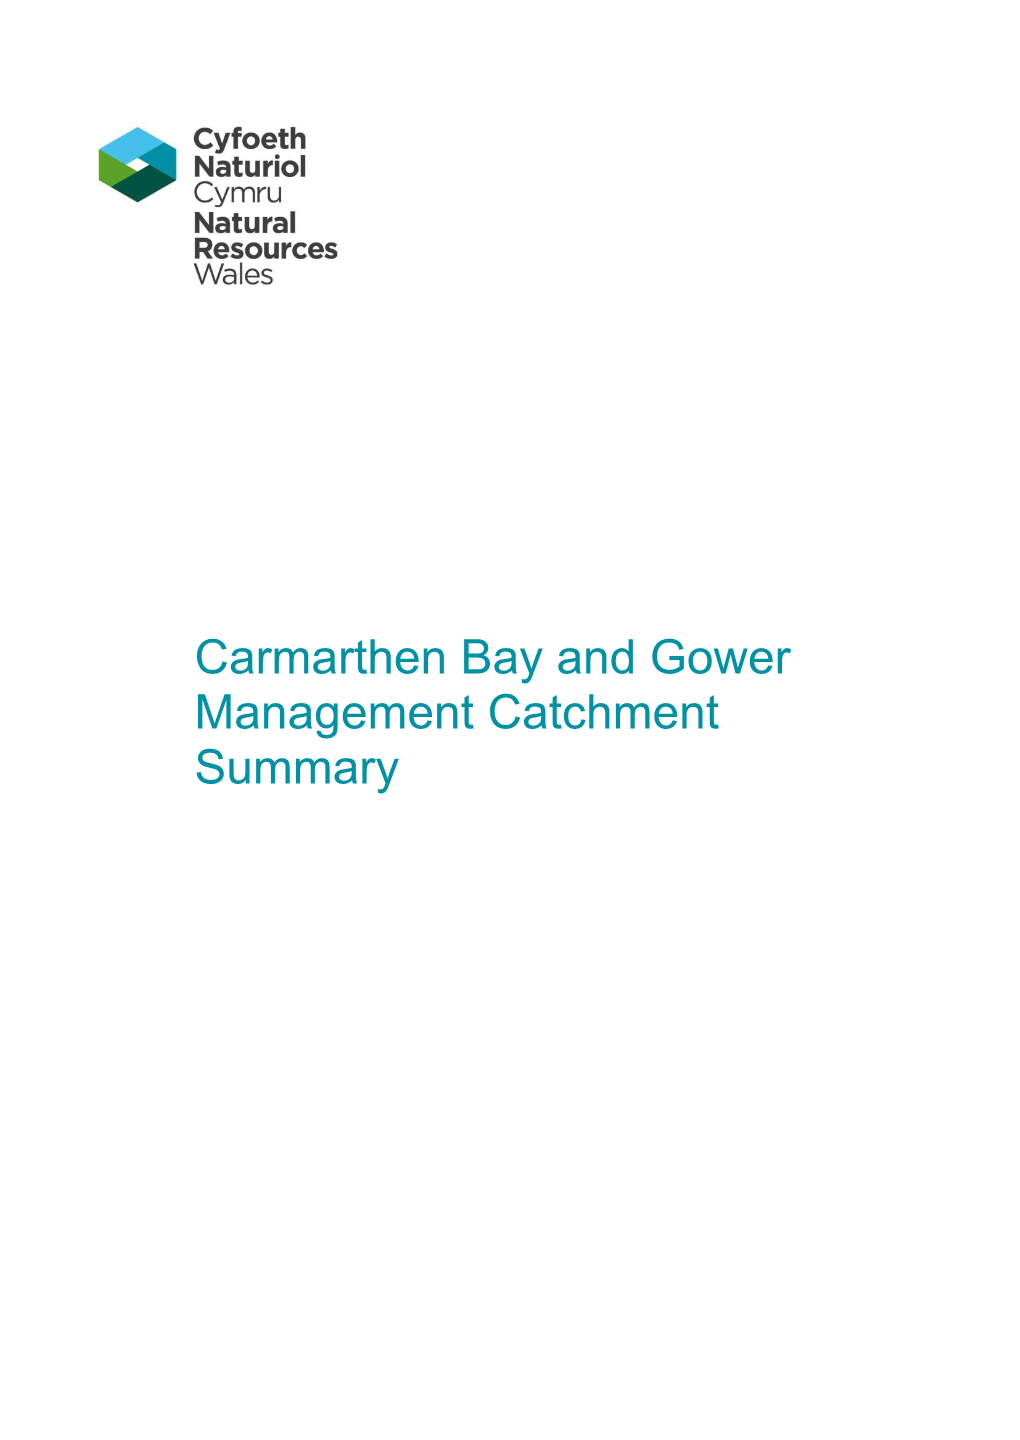 Carmarthen Bay and Gower Management Catchment Summary